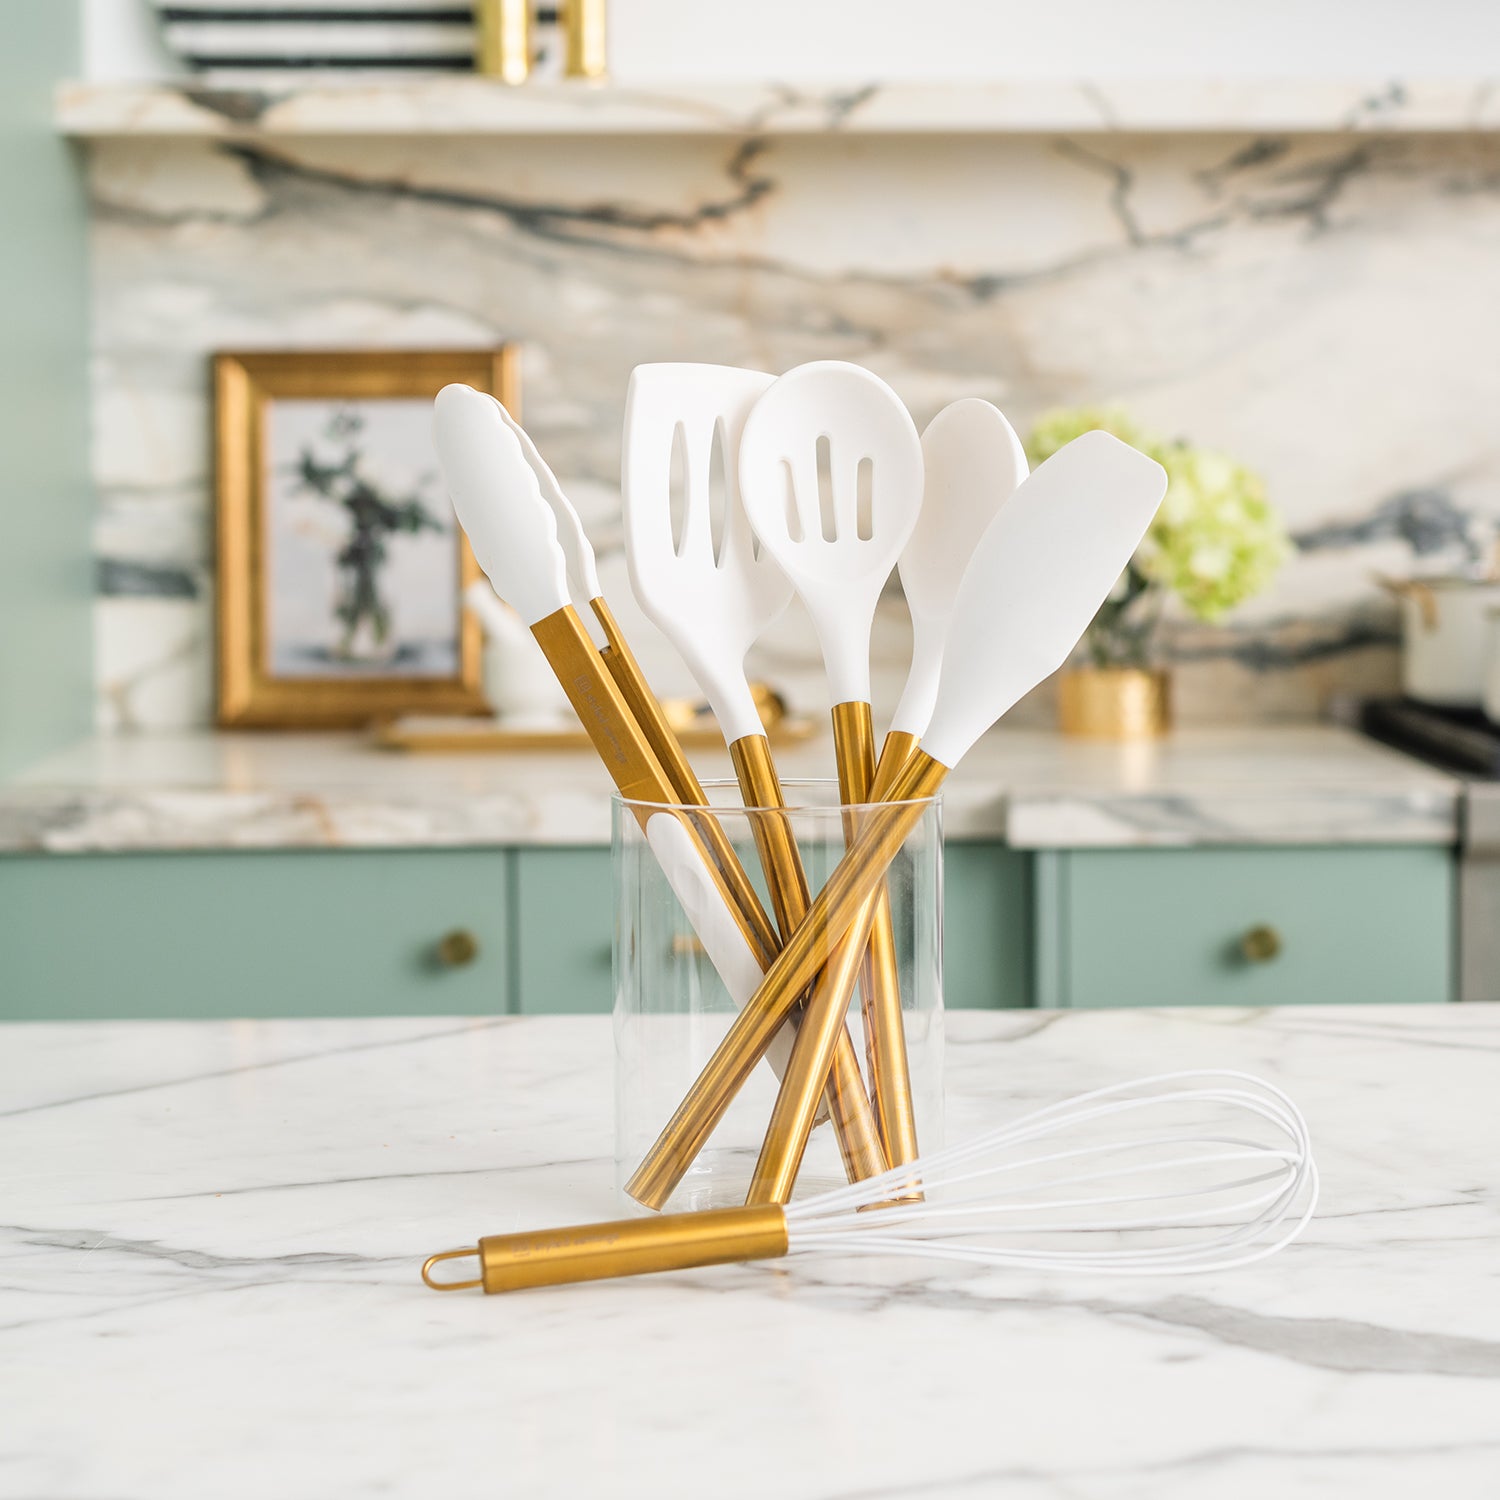 White Silicone and Gold Cooking Utensils for Modern Cooking and Serving